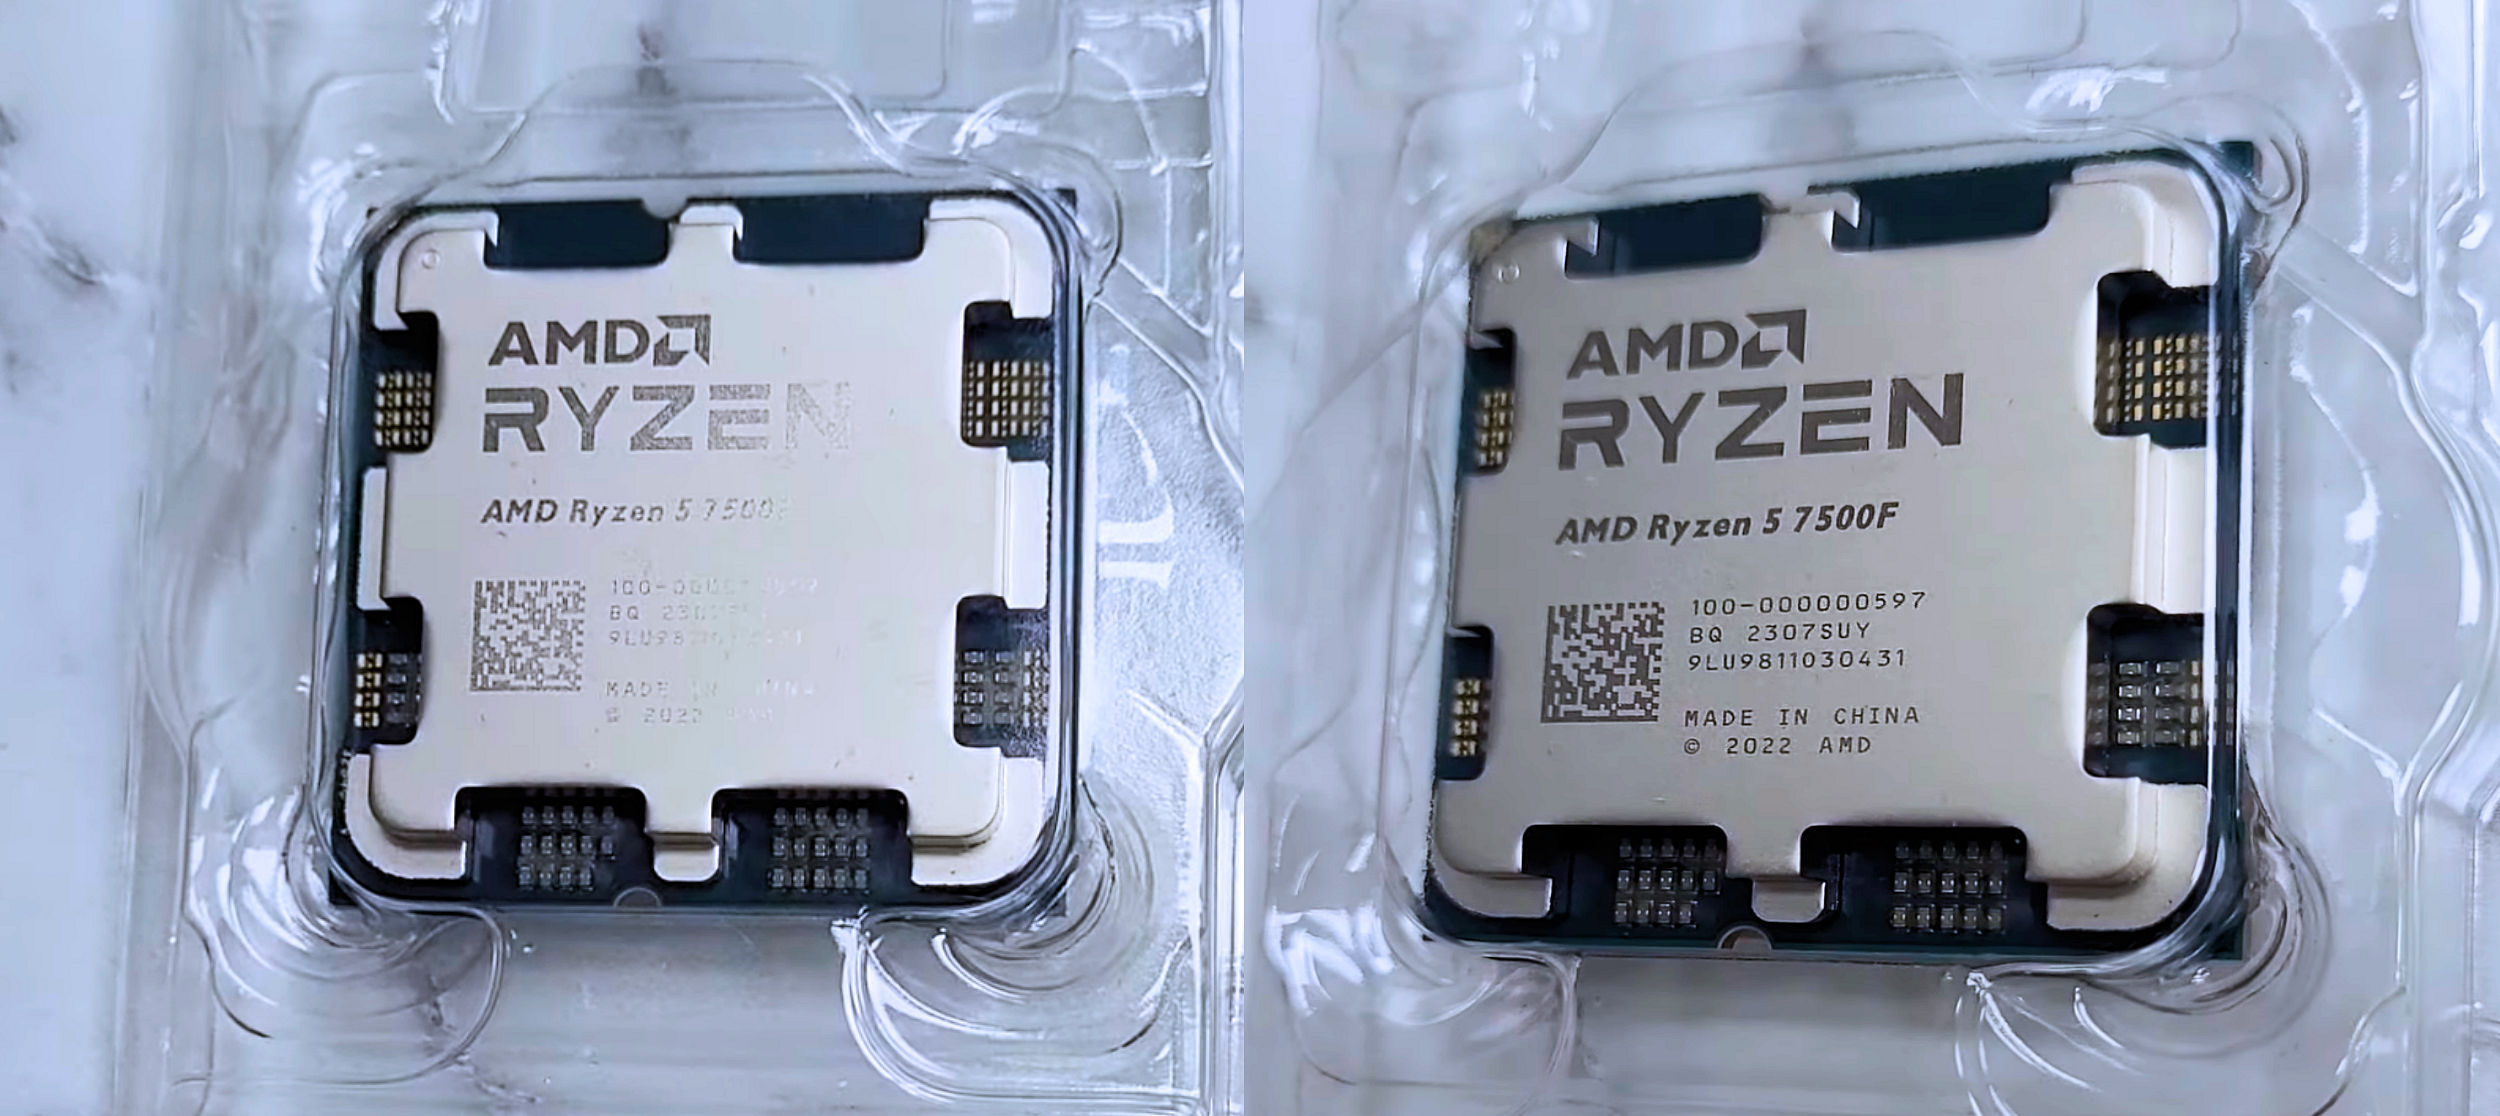 AMD Ryzen 5 7600 Review - The Cheapest AM5 Option –